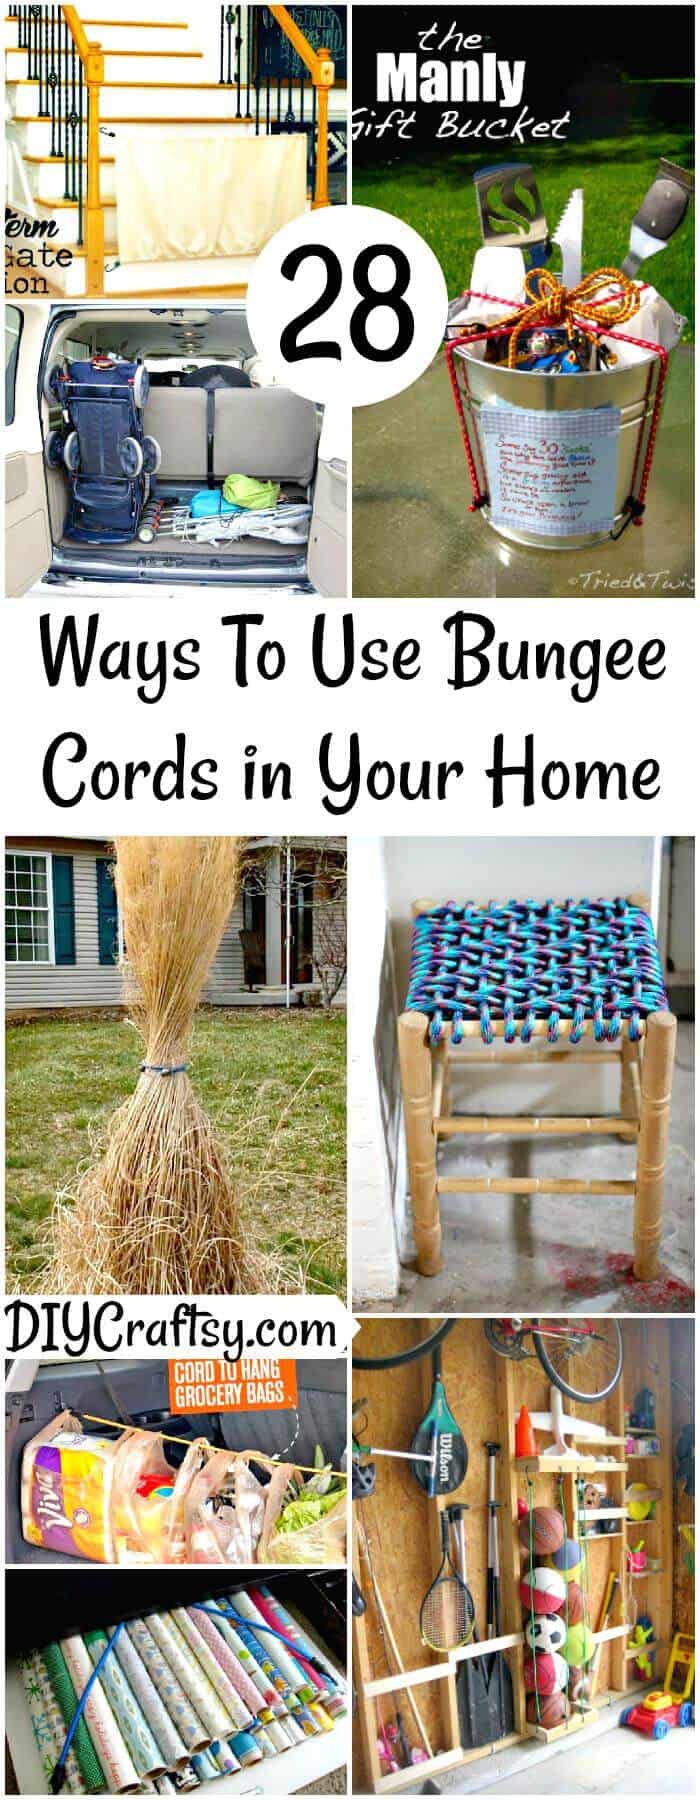 28-Ways-To-Use-Bungee-Cords-in-Your-Home-DIY-Bungee-Cord-Hacks